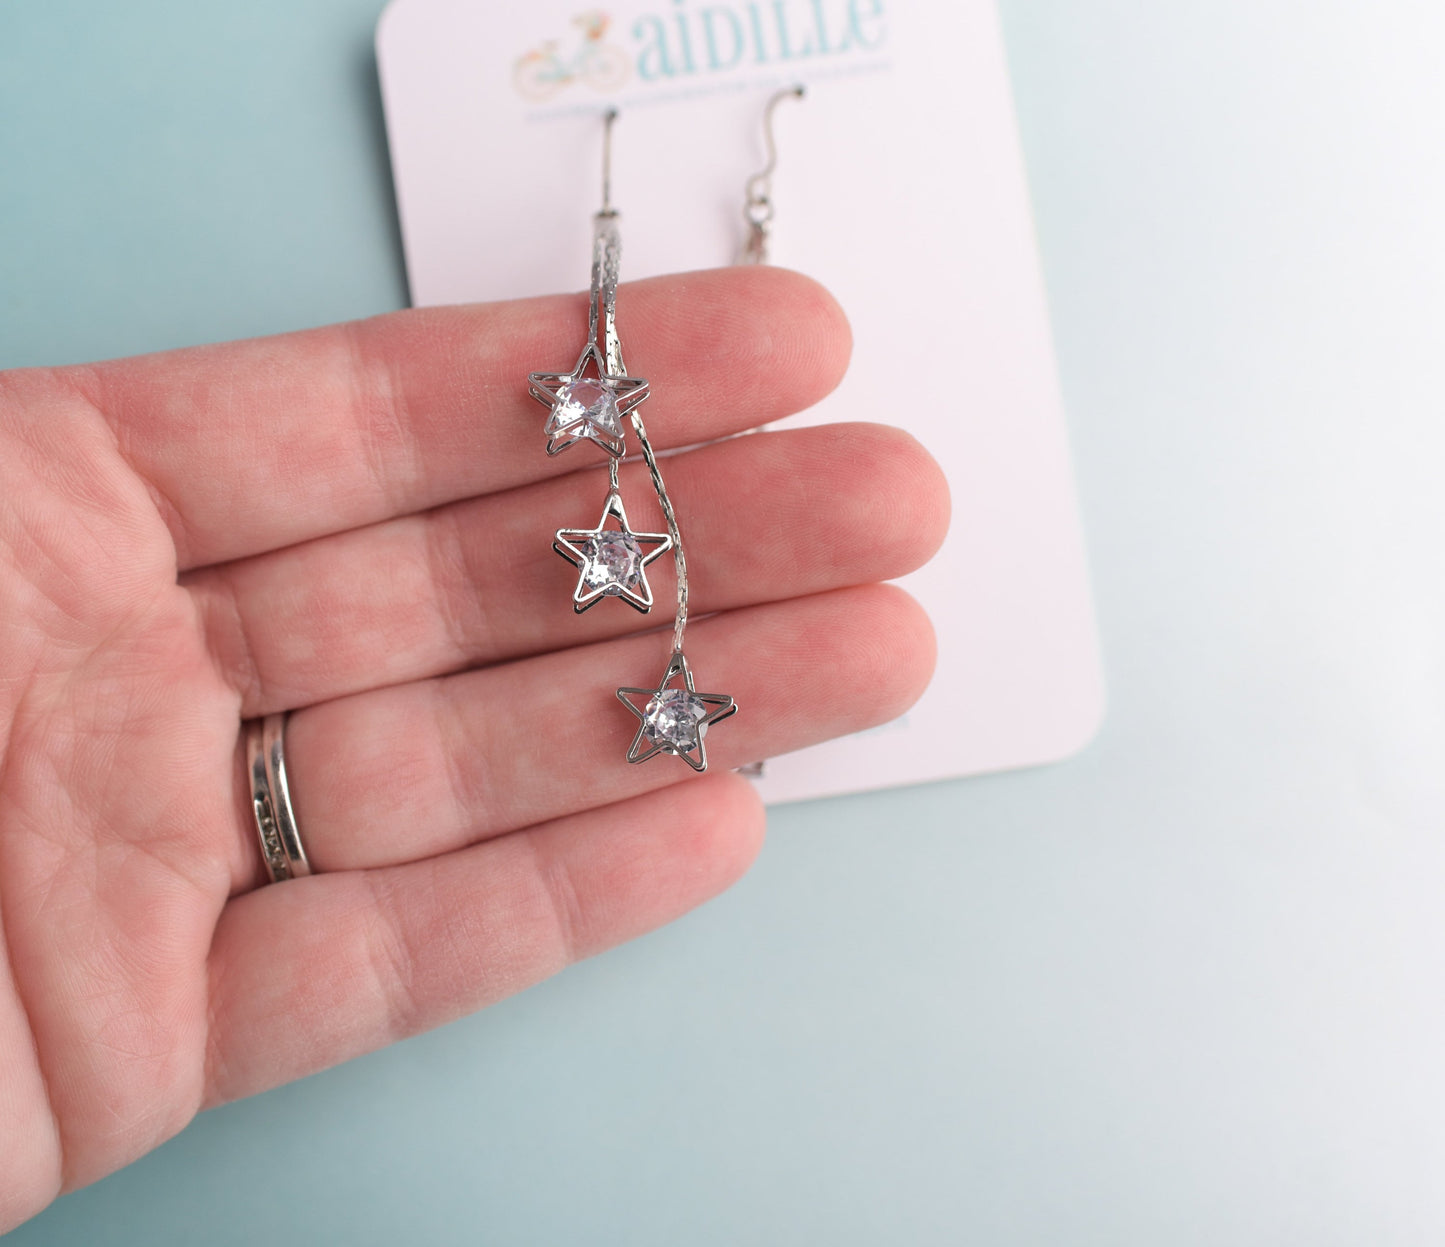 Long Silver Star Cubic Zirconia Dangle Earrings with Titanium Ear Wires